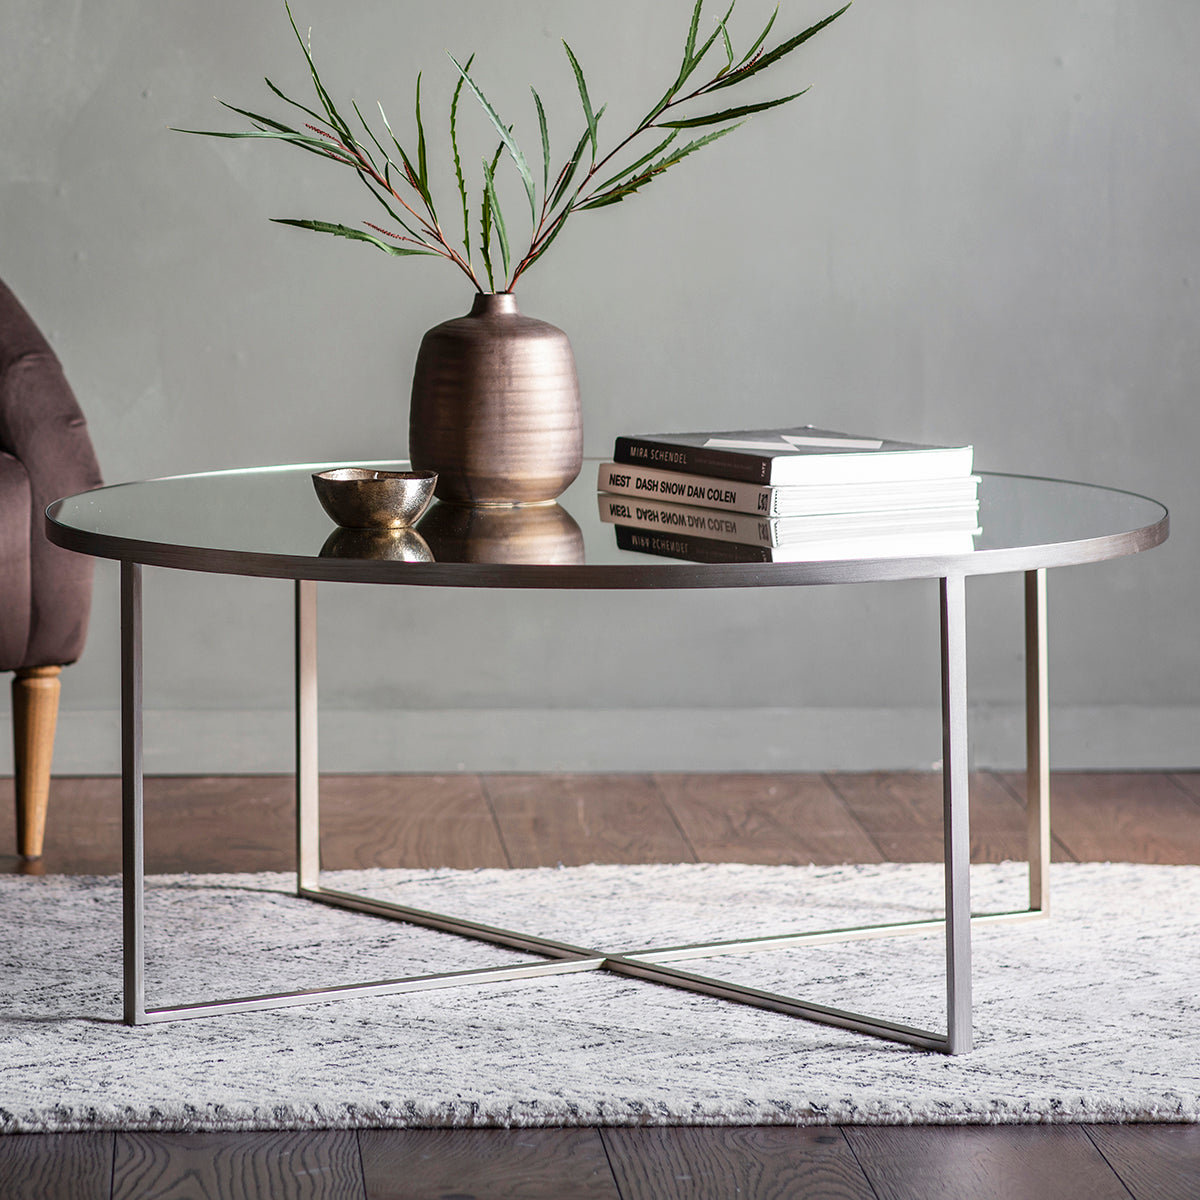 A Silver Torrance Coffee Table with a plant on top, perfect for home furniture and interior decor.